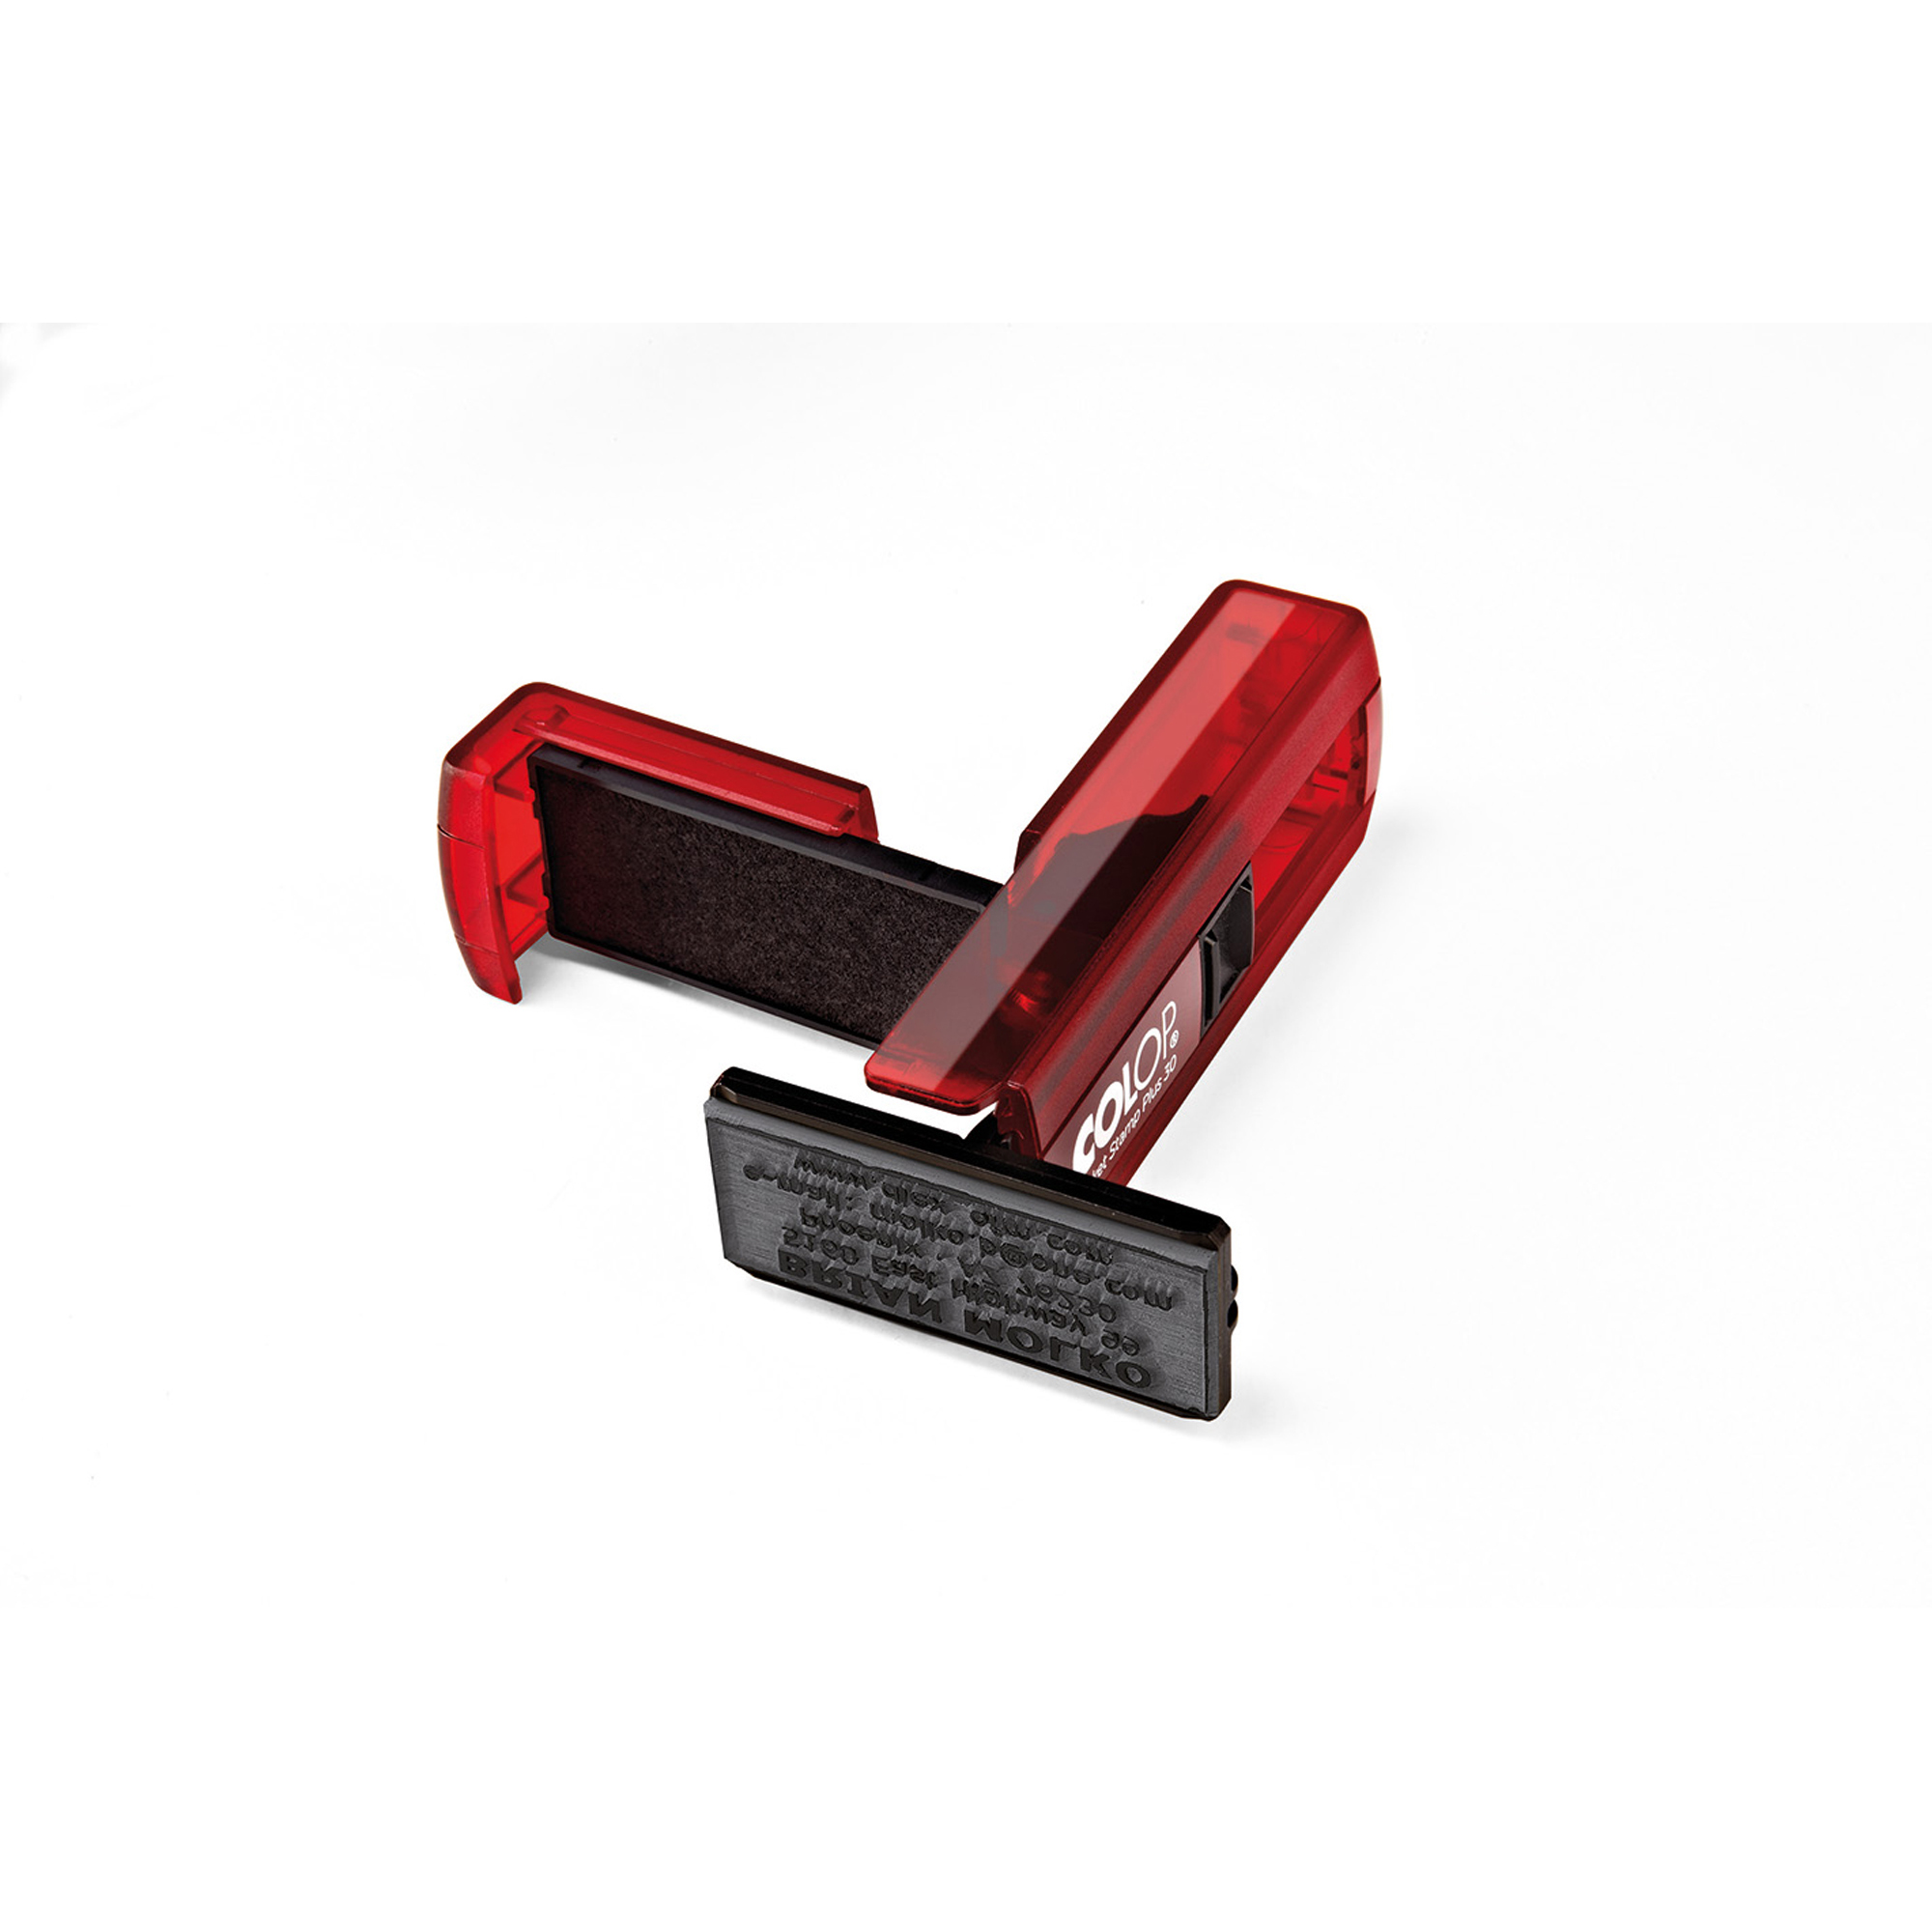 Timbro Pocket Stamp Plus 30 18x47mm 5righe Autoinchiostrante Rosso Colop Psp30ru 9004362494393